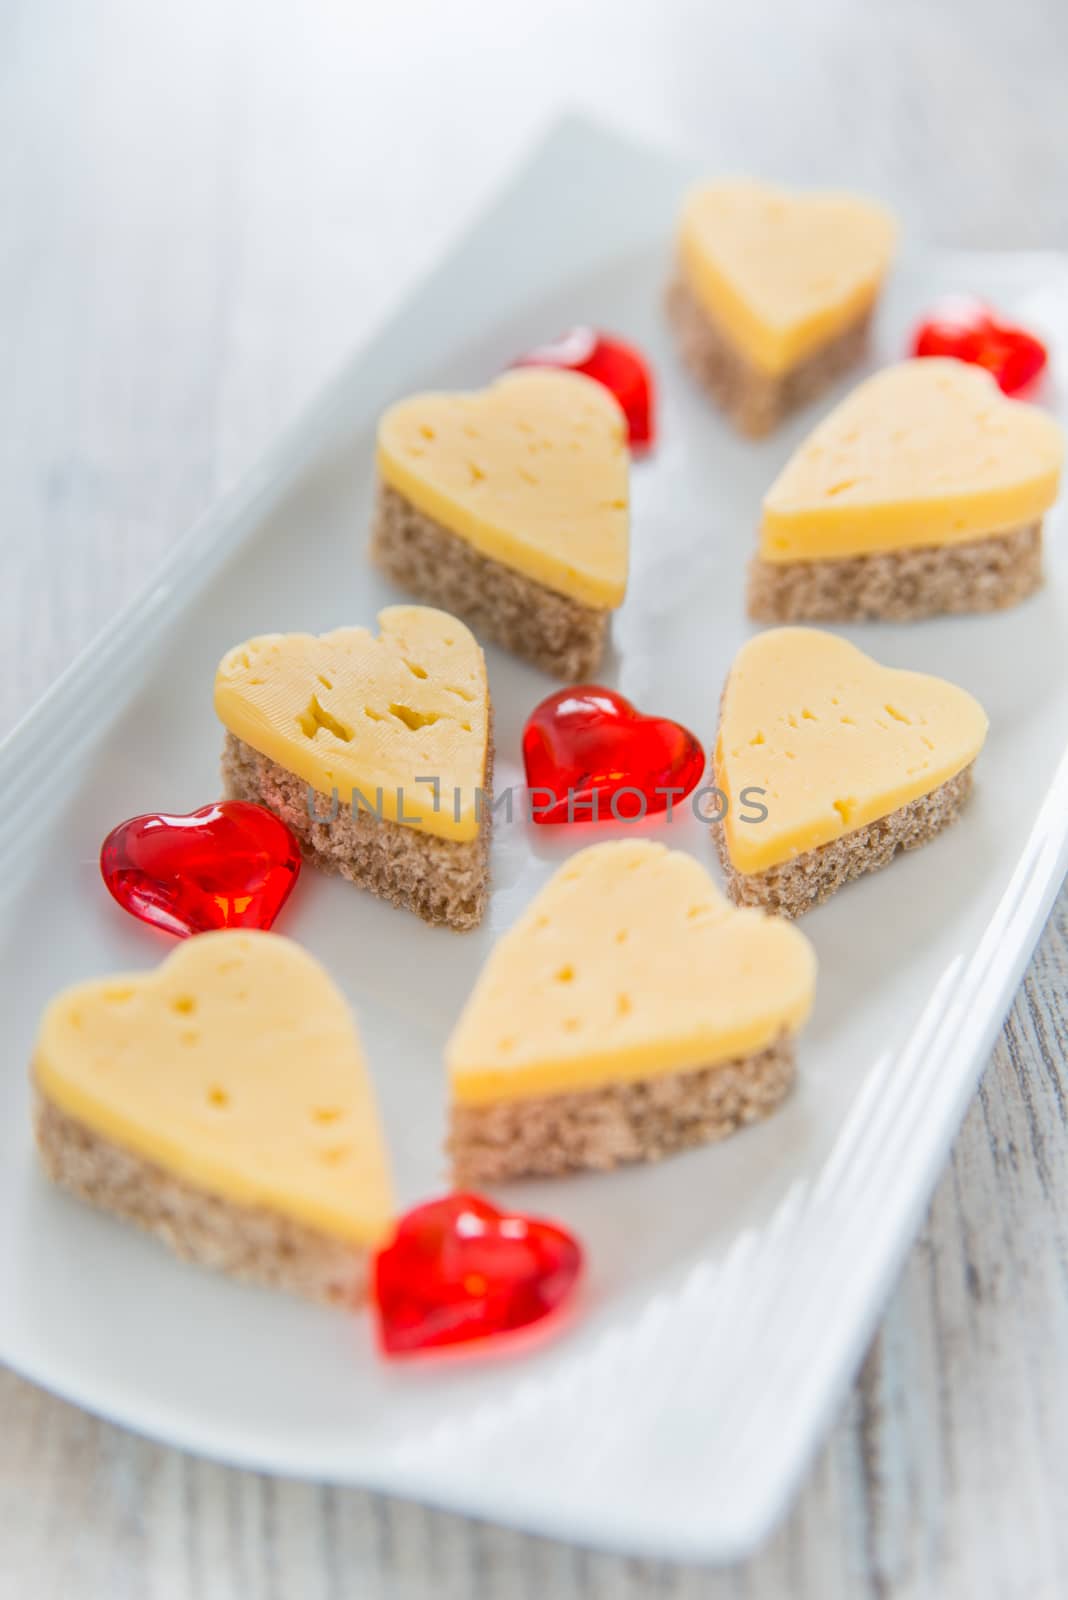 Heart shaped cheese sandwiches by Linaga